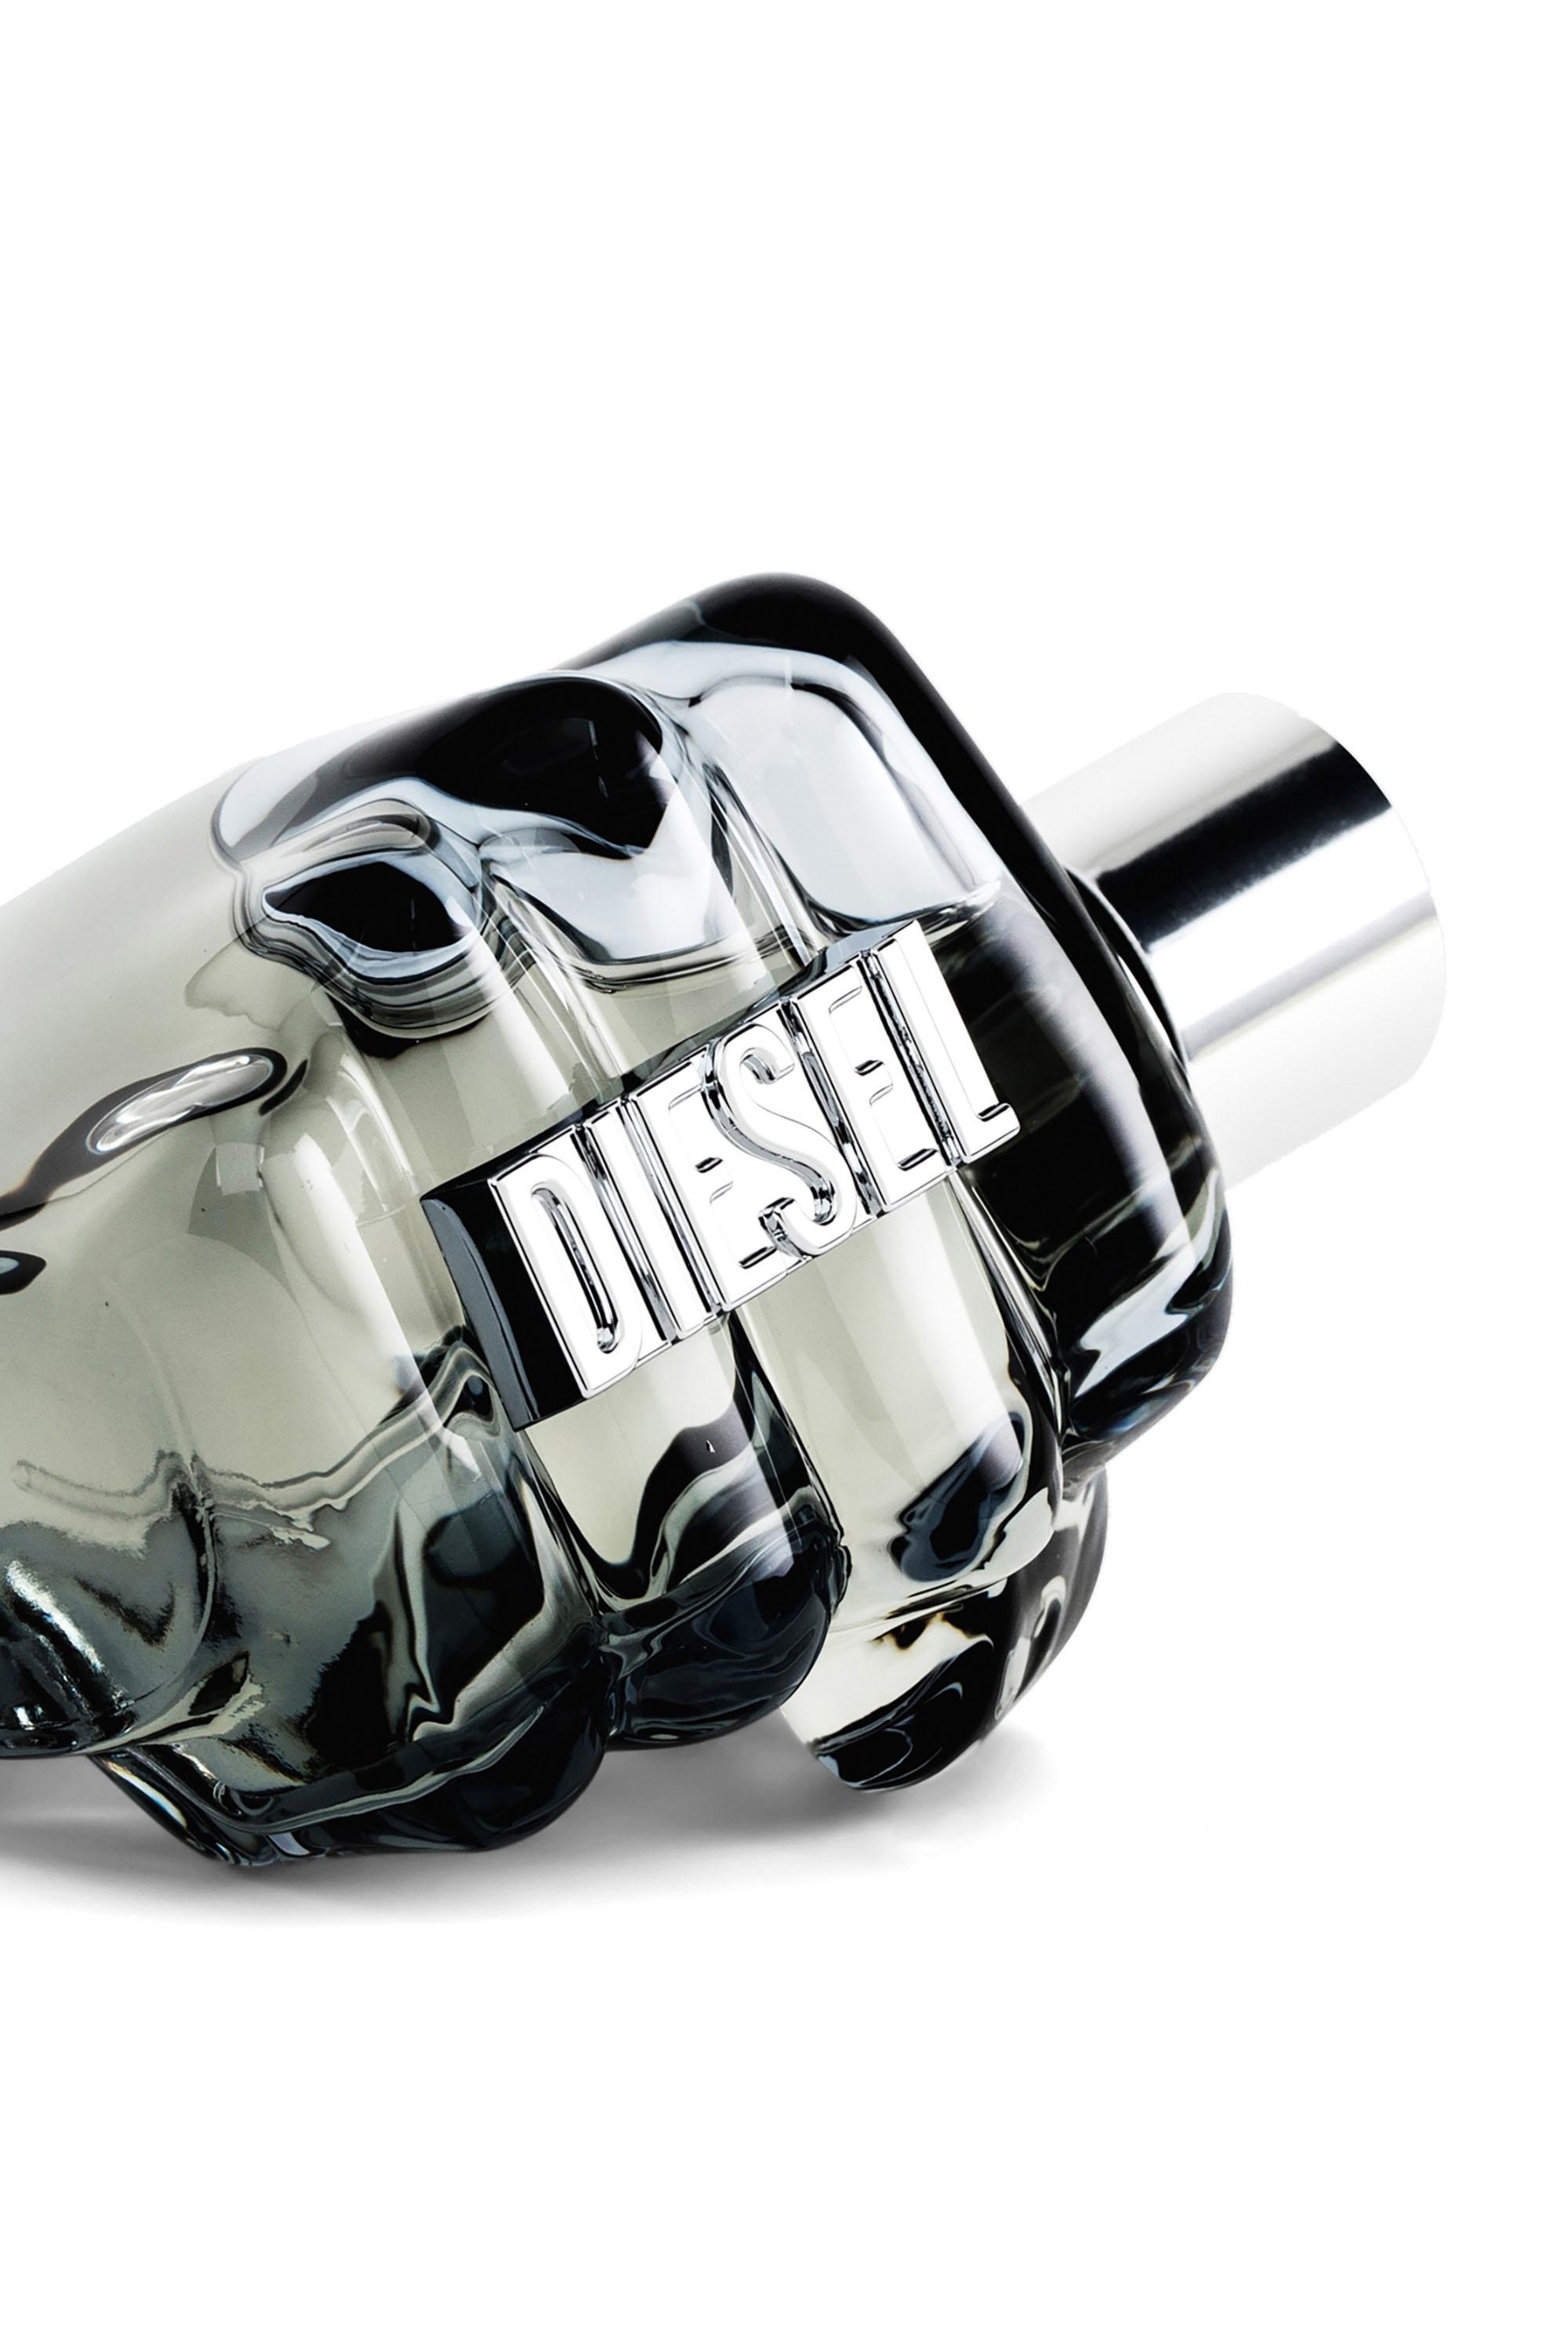 Diesel - ONLY THE BRAVE 75ML , White - Image 3